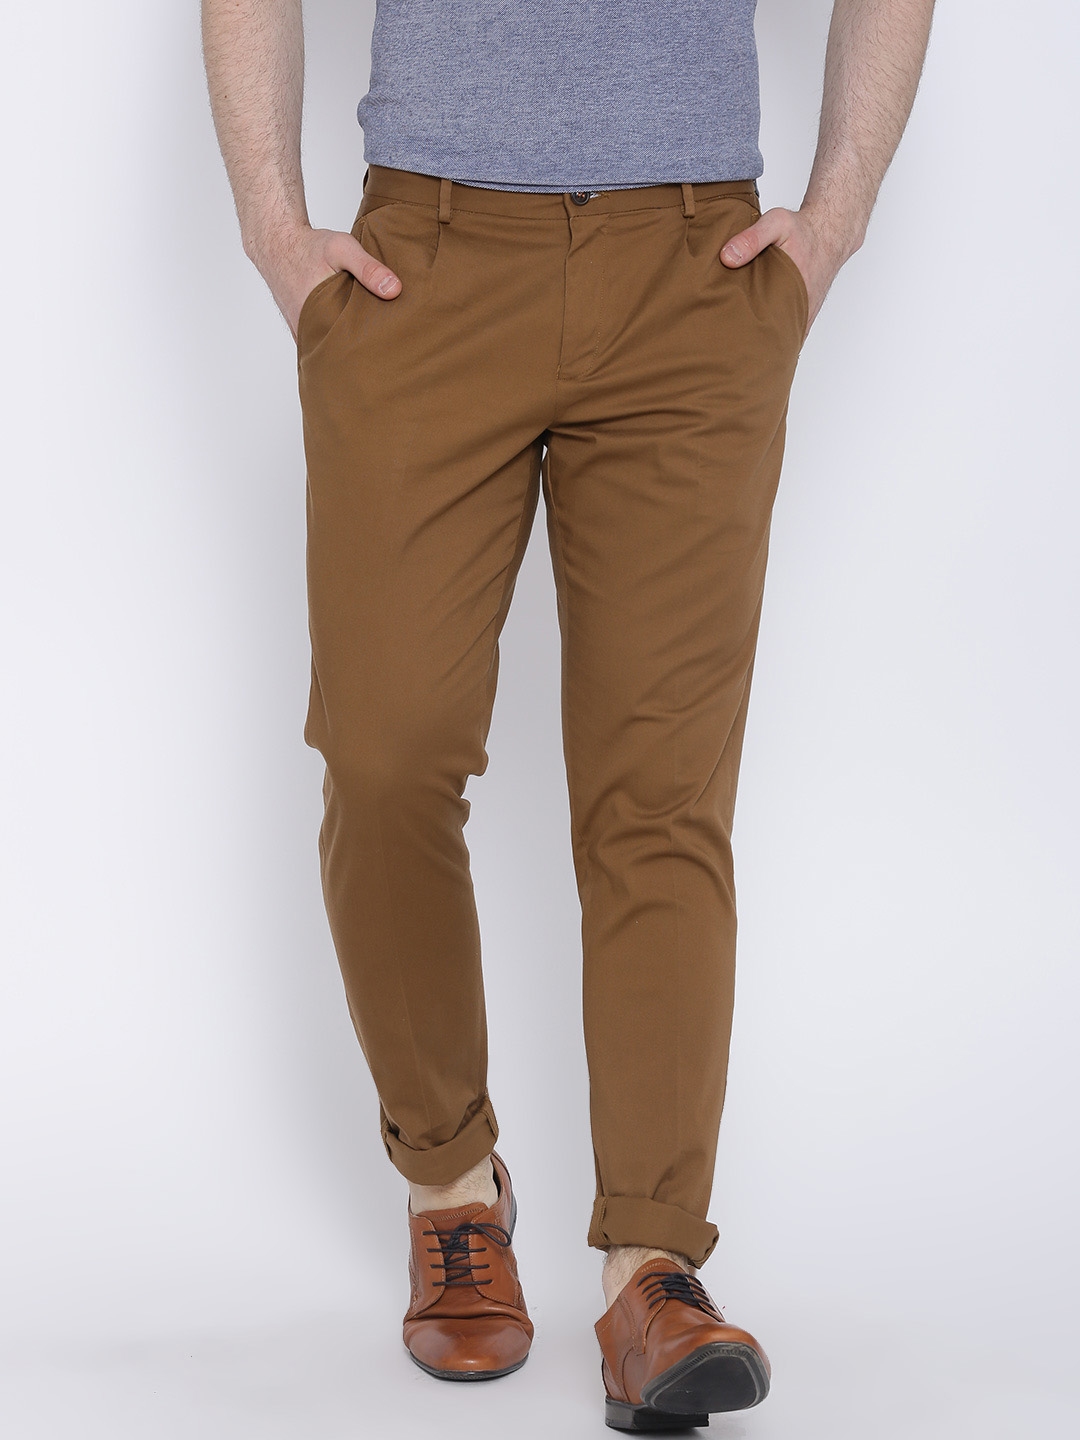 Check Formal Trousers In Brown B95 Ricam